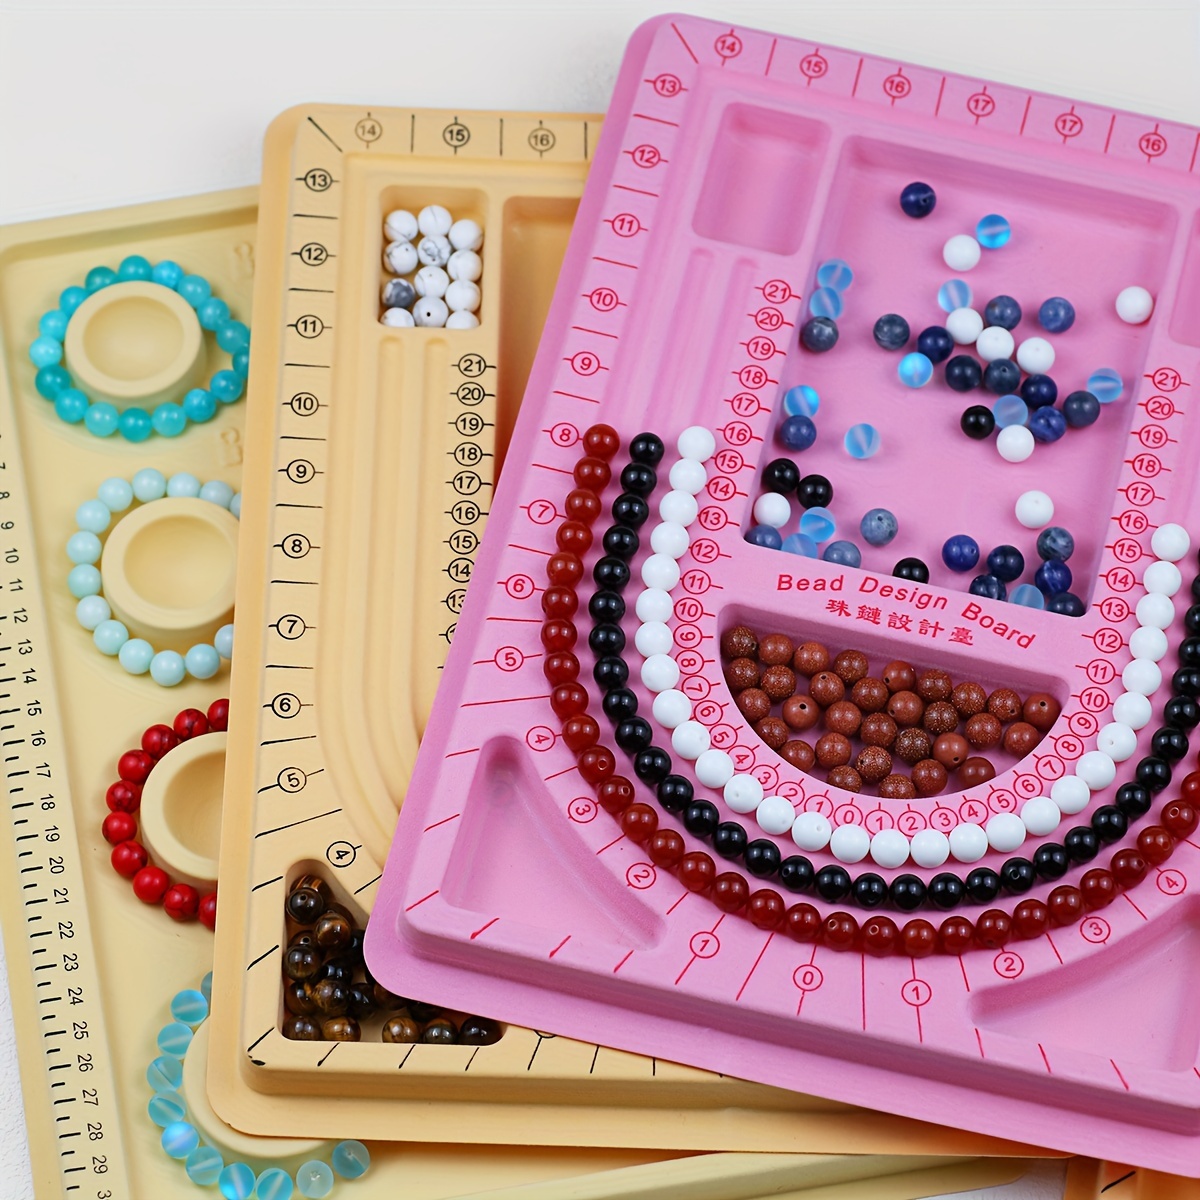 MOUMOUTEN Bead Board, Necklace Beading Jewelry Organiser Tray DIY Craft  Tool Necessary for Professional to String Beads Boards Accessories Hand  Making